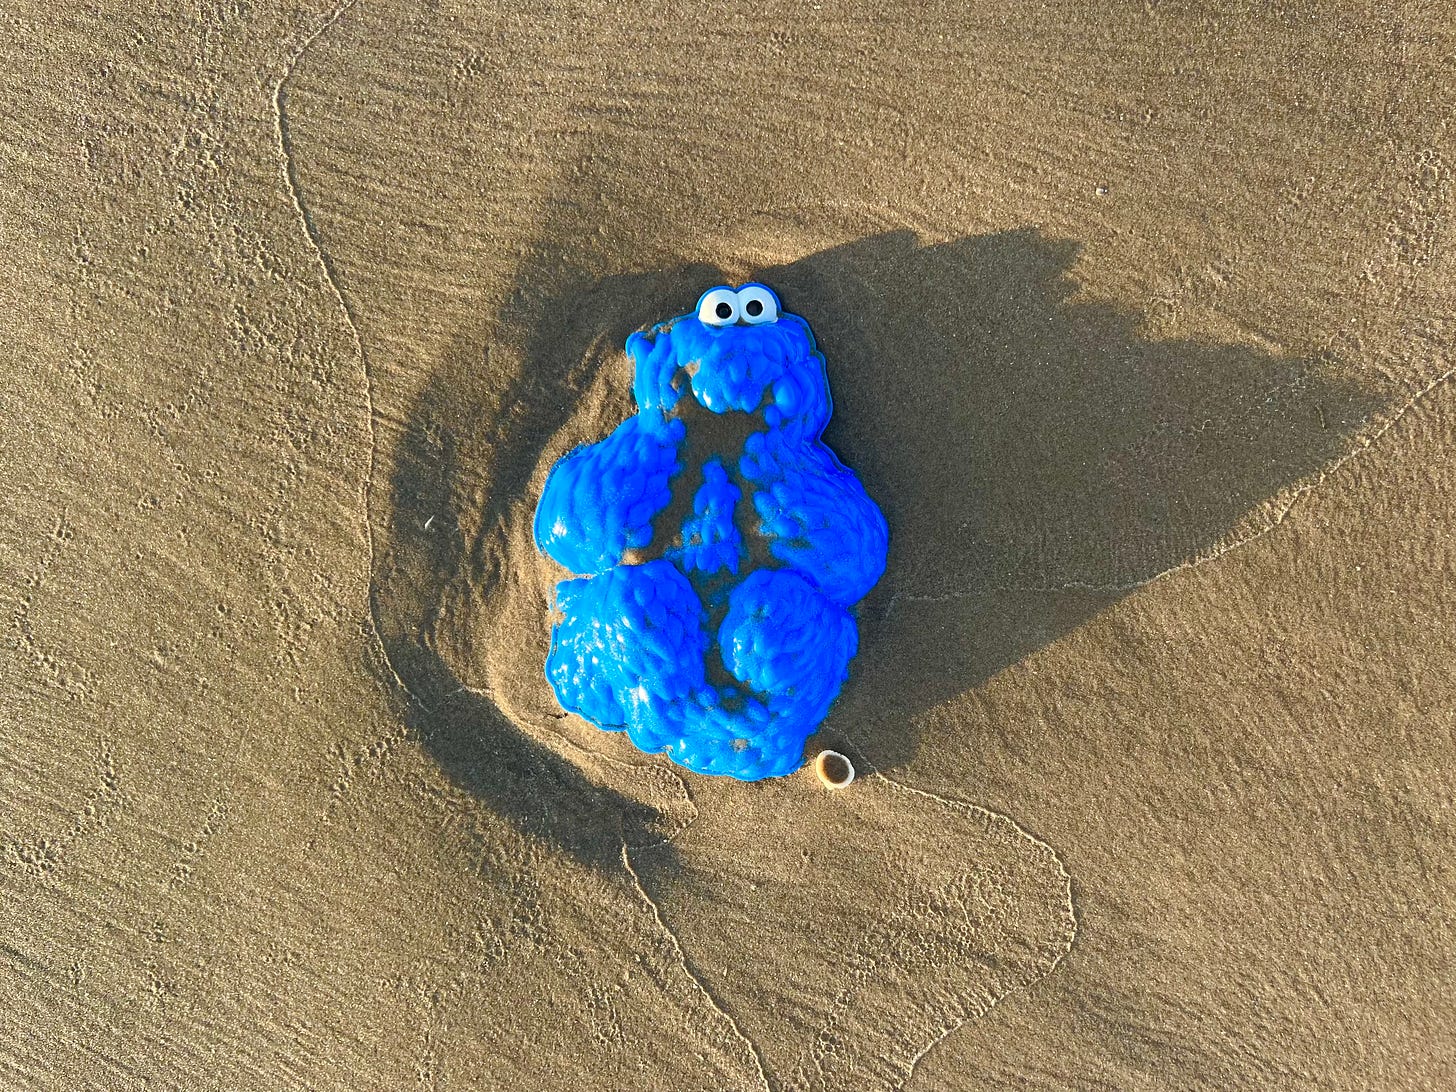 Cookie monster in the sand